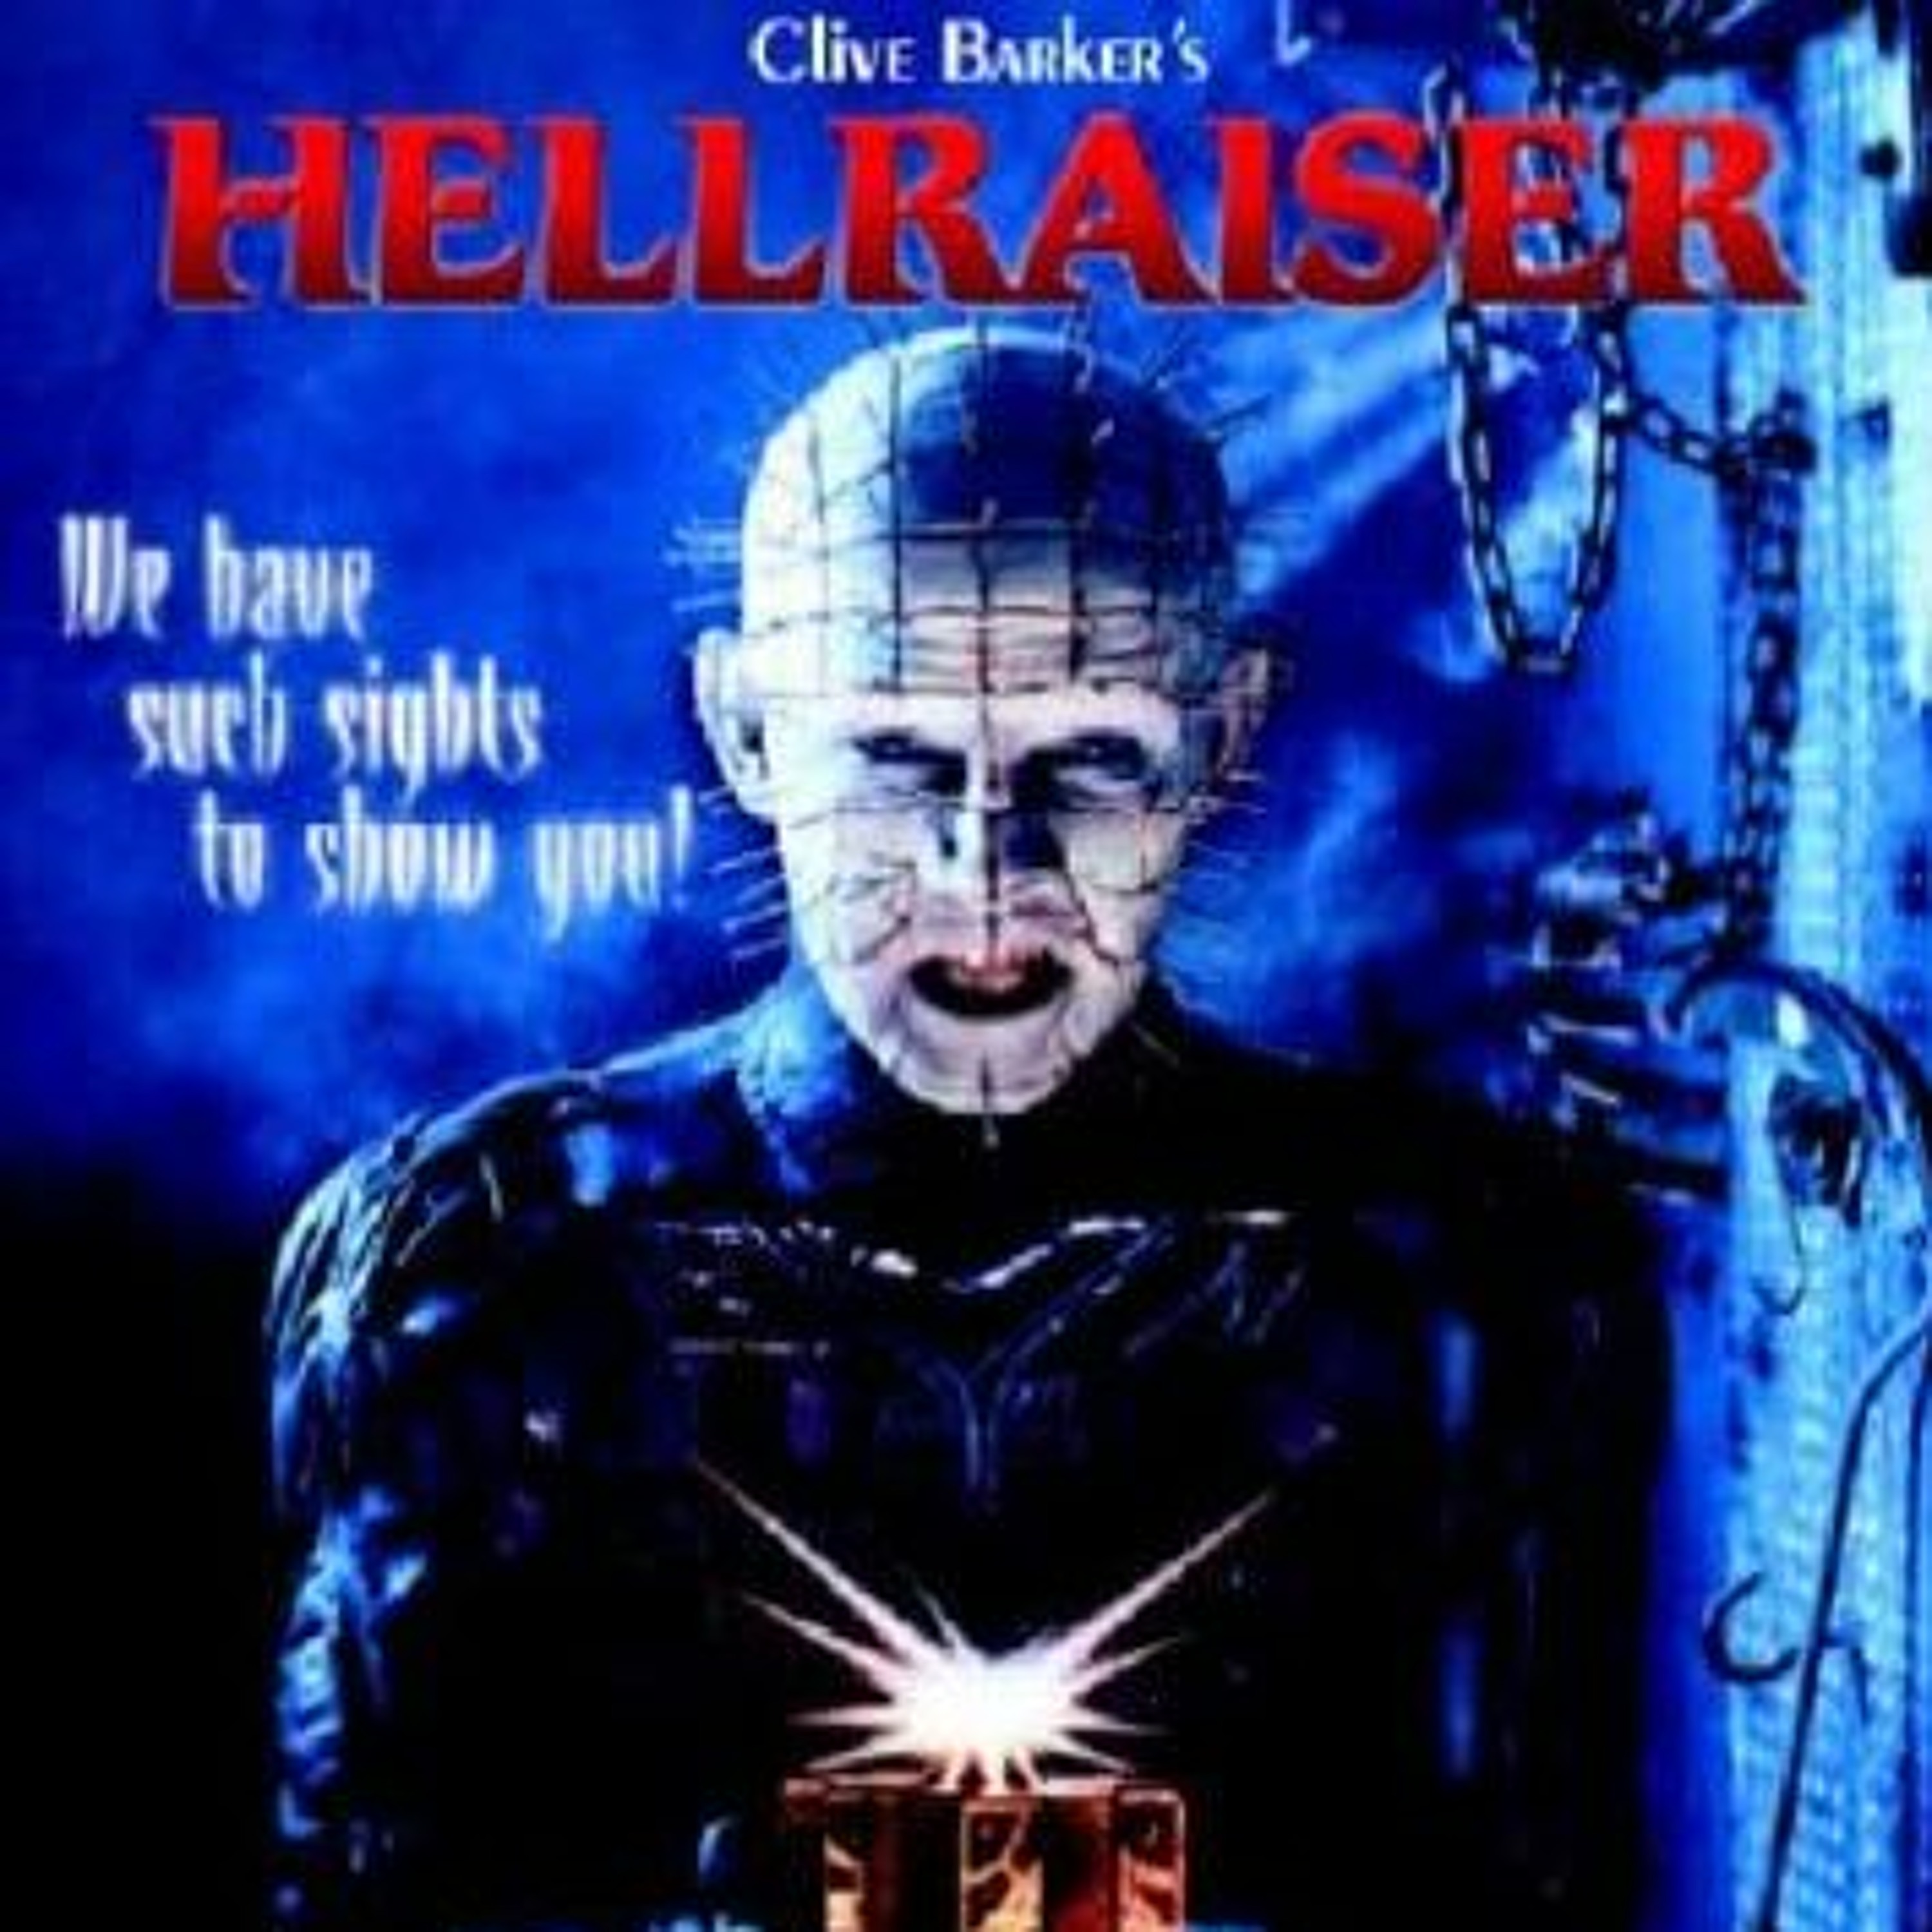 Episode 13 - Hellraiser: Twitch Has Such Sights to Show You